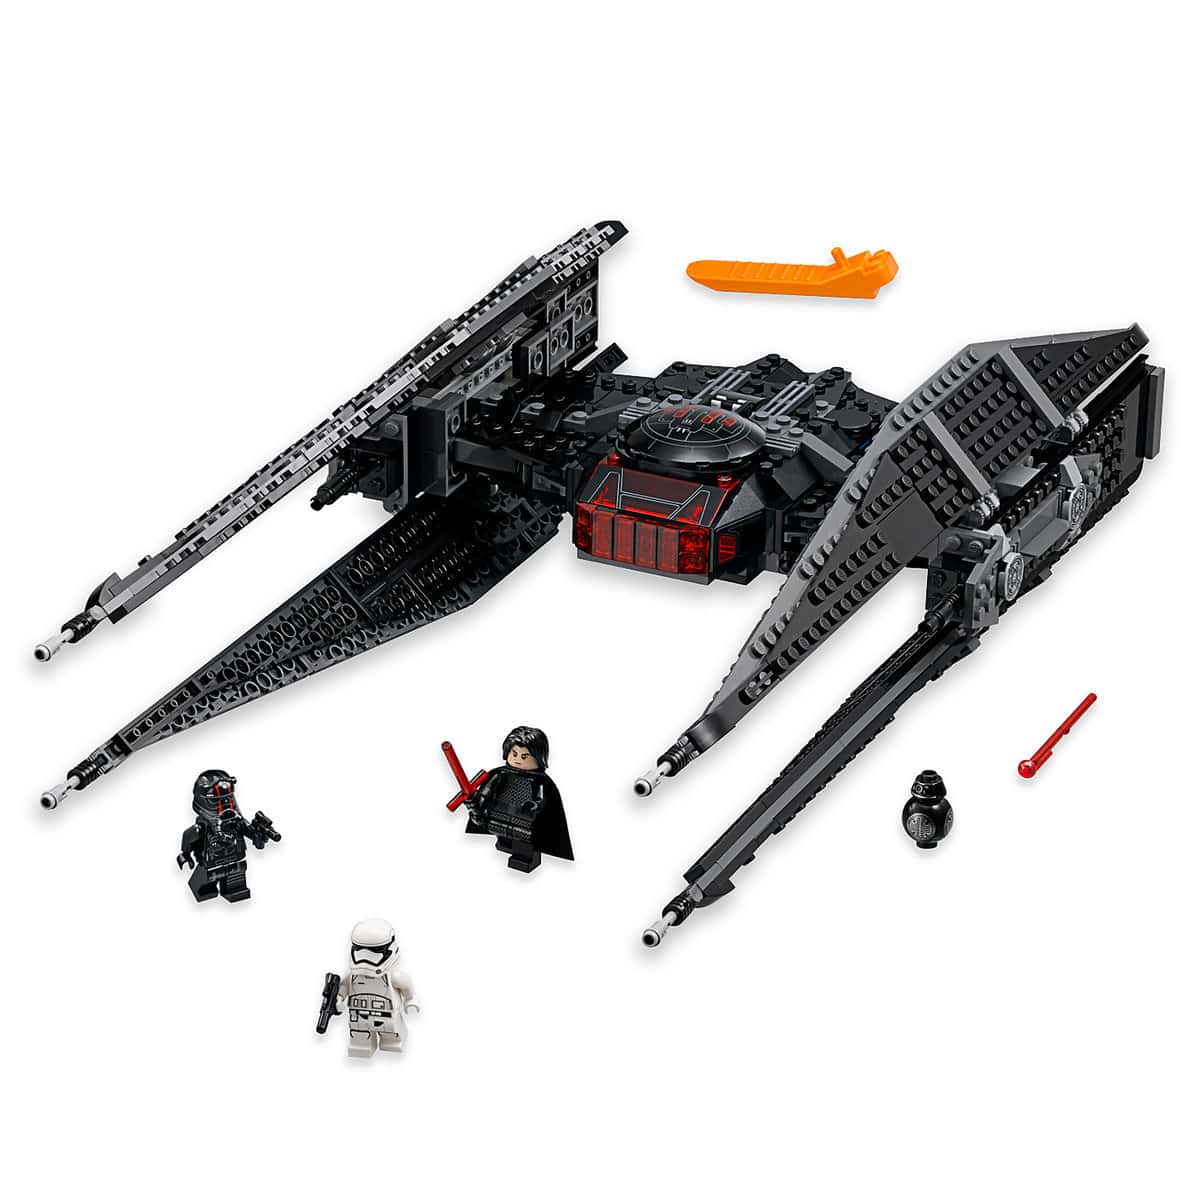 LEGO Star Wars Kylo Ren's TIE Fighter Review - Another Strong Addition